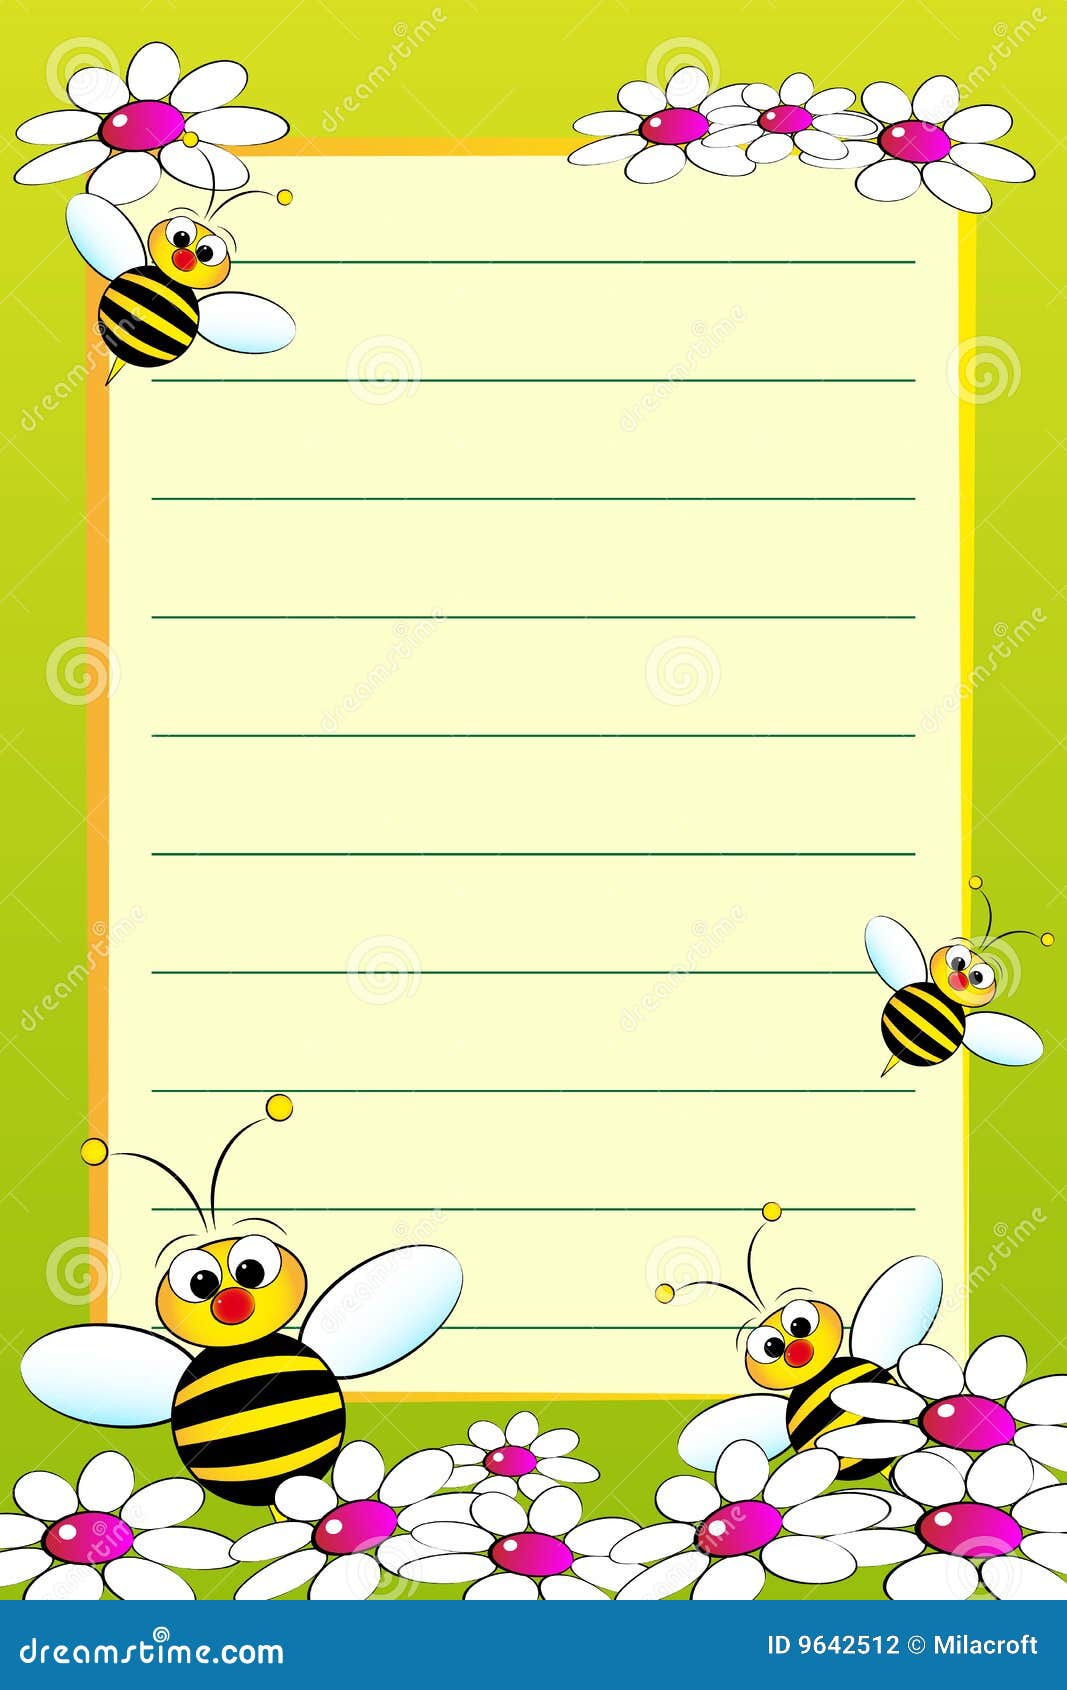 Kid Notebook With Blank Lined Page Stock Photography - Image: 9642512